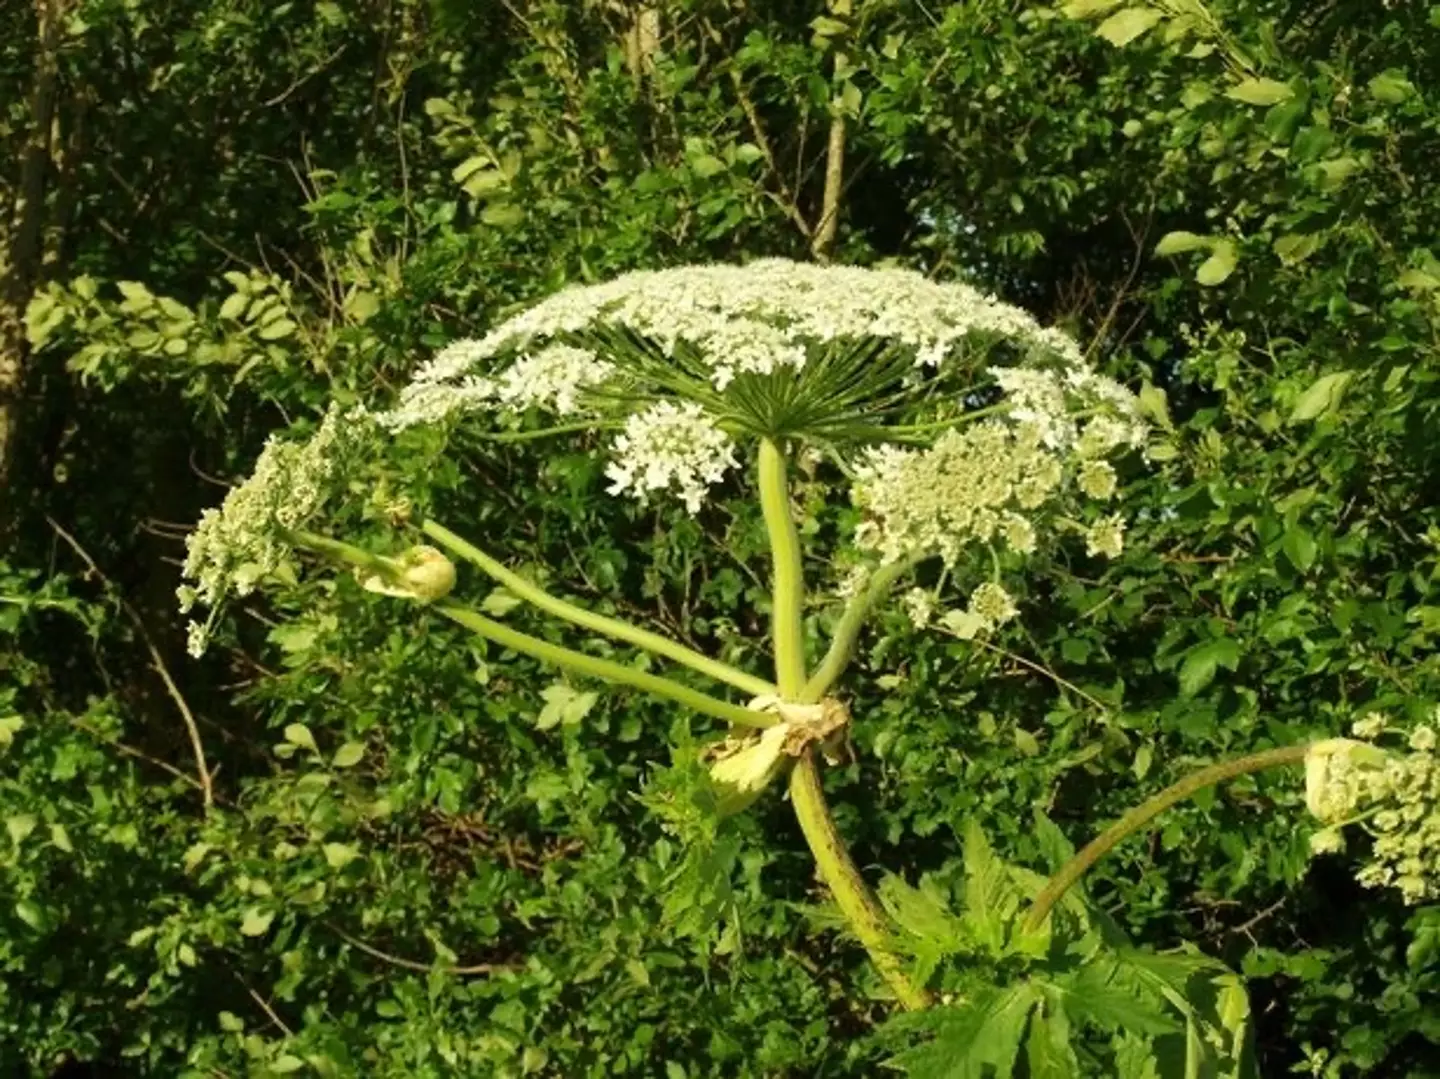 Giant hogweed is an enormous cow parsley-like plant that can cause burns to dogs and humans.